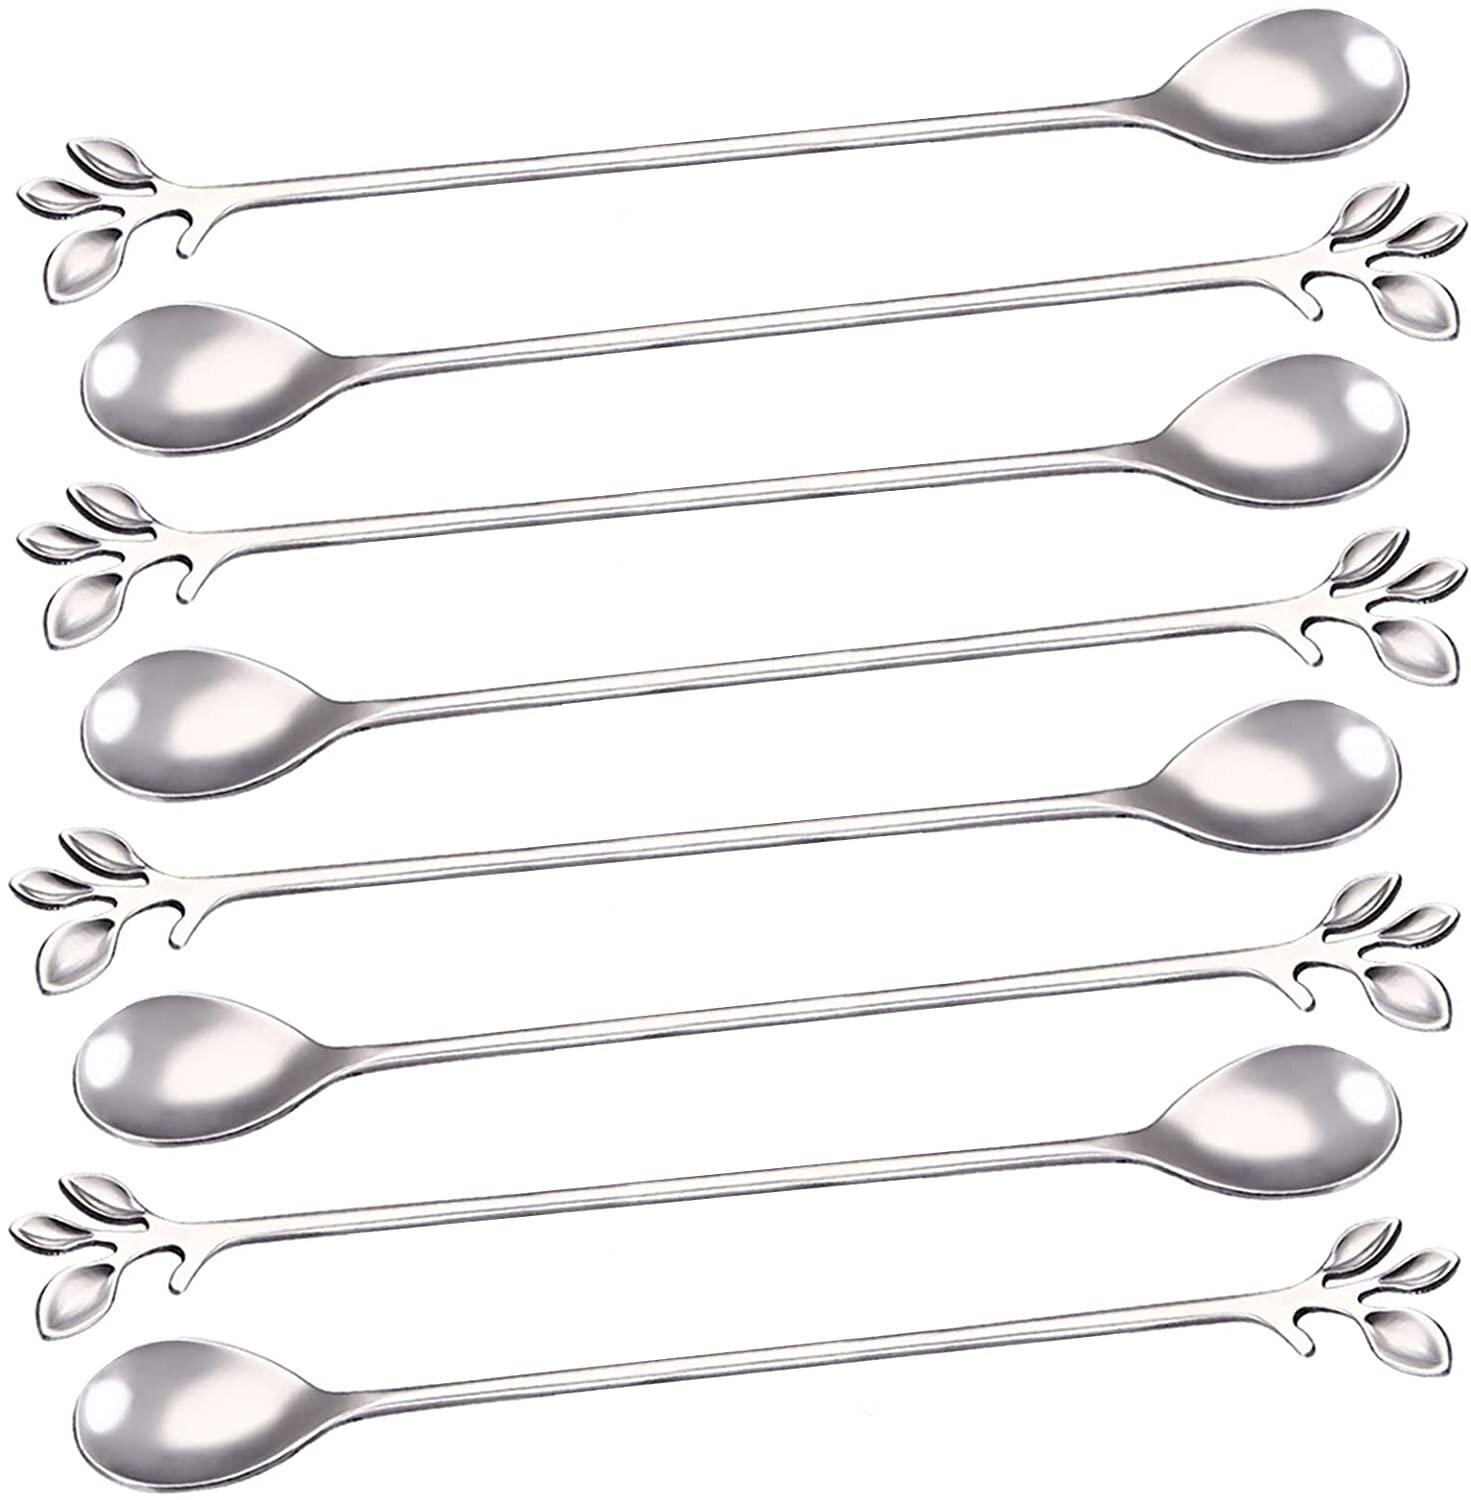 Stainless Steel Coffee Cocktail Stirring Spoon for Ice Cream Smoothie Mixing 